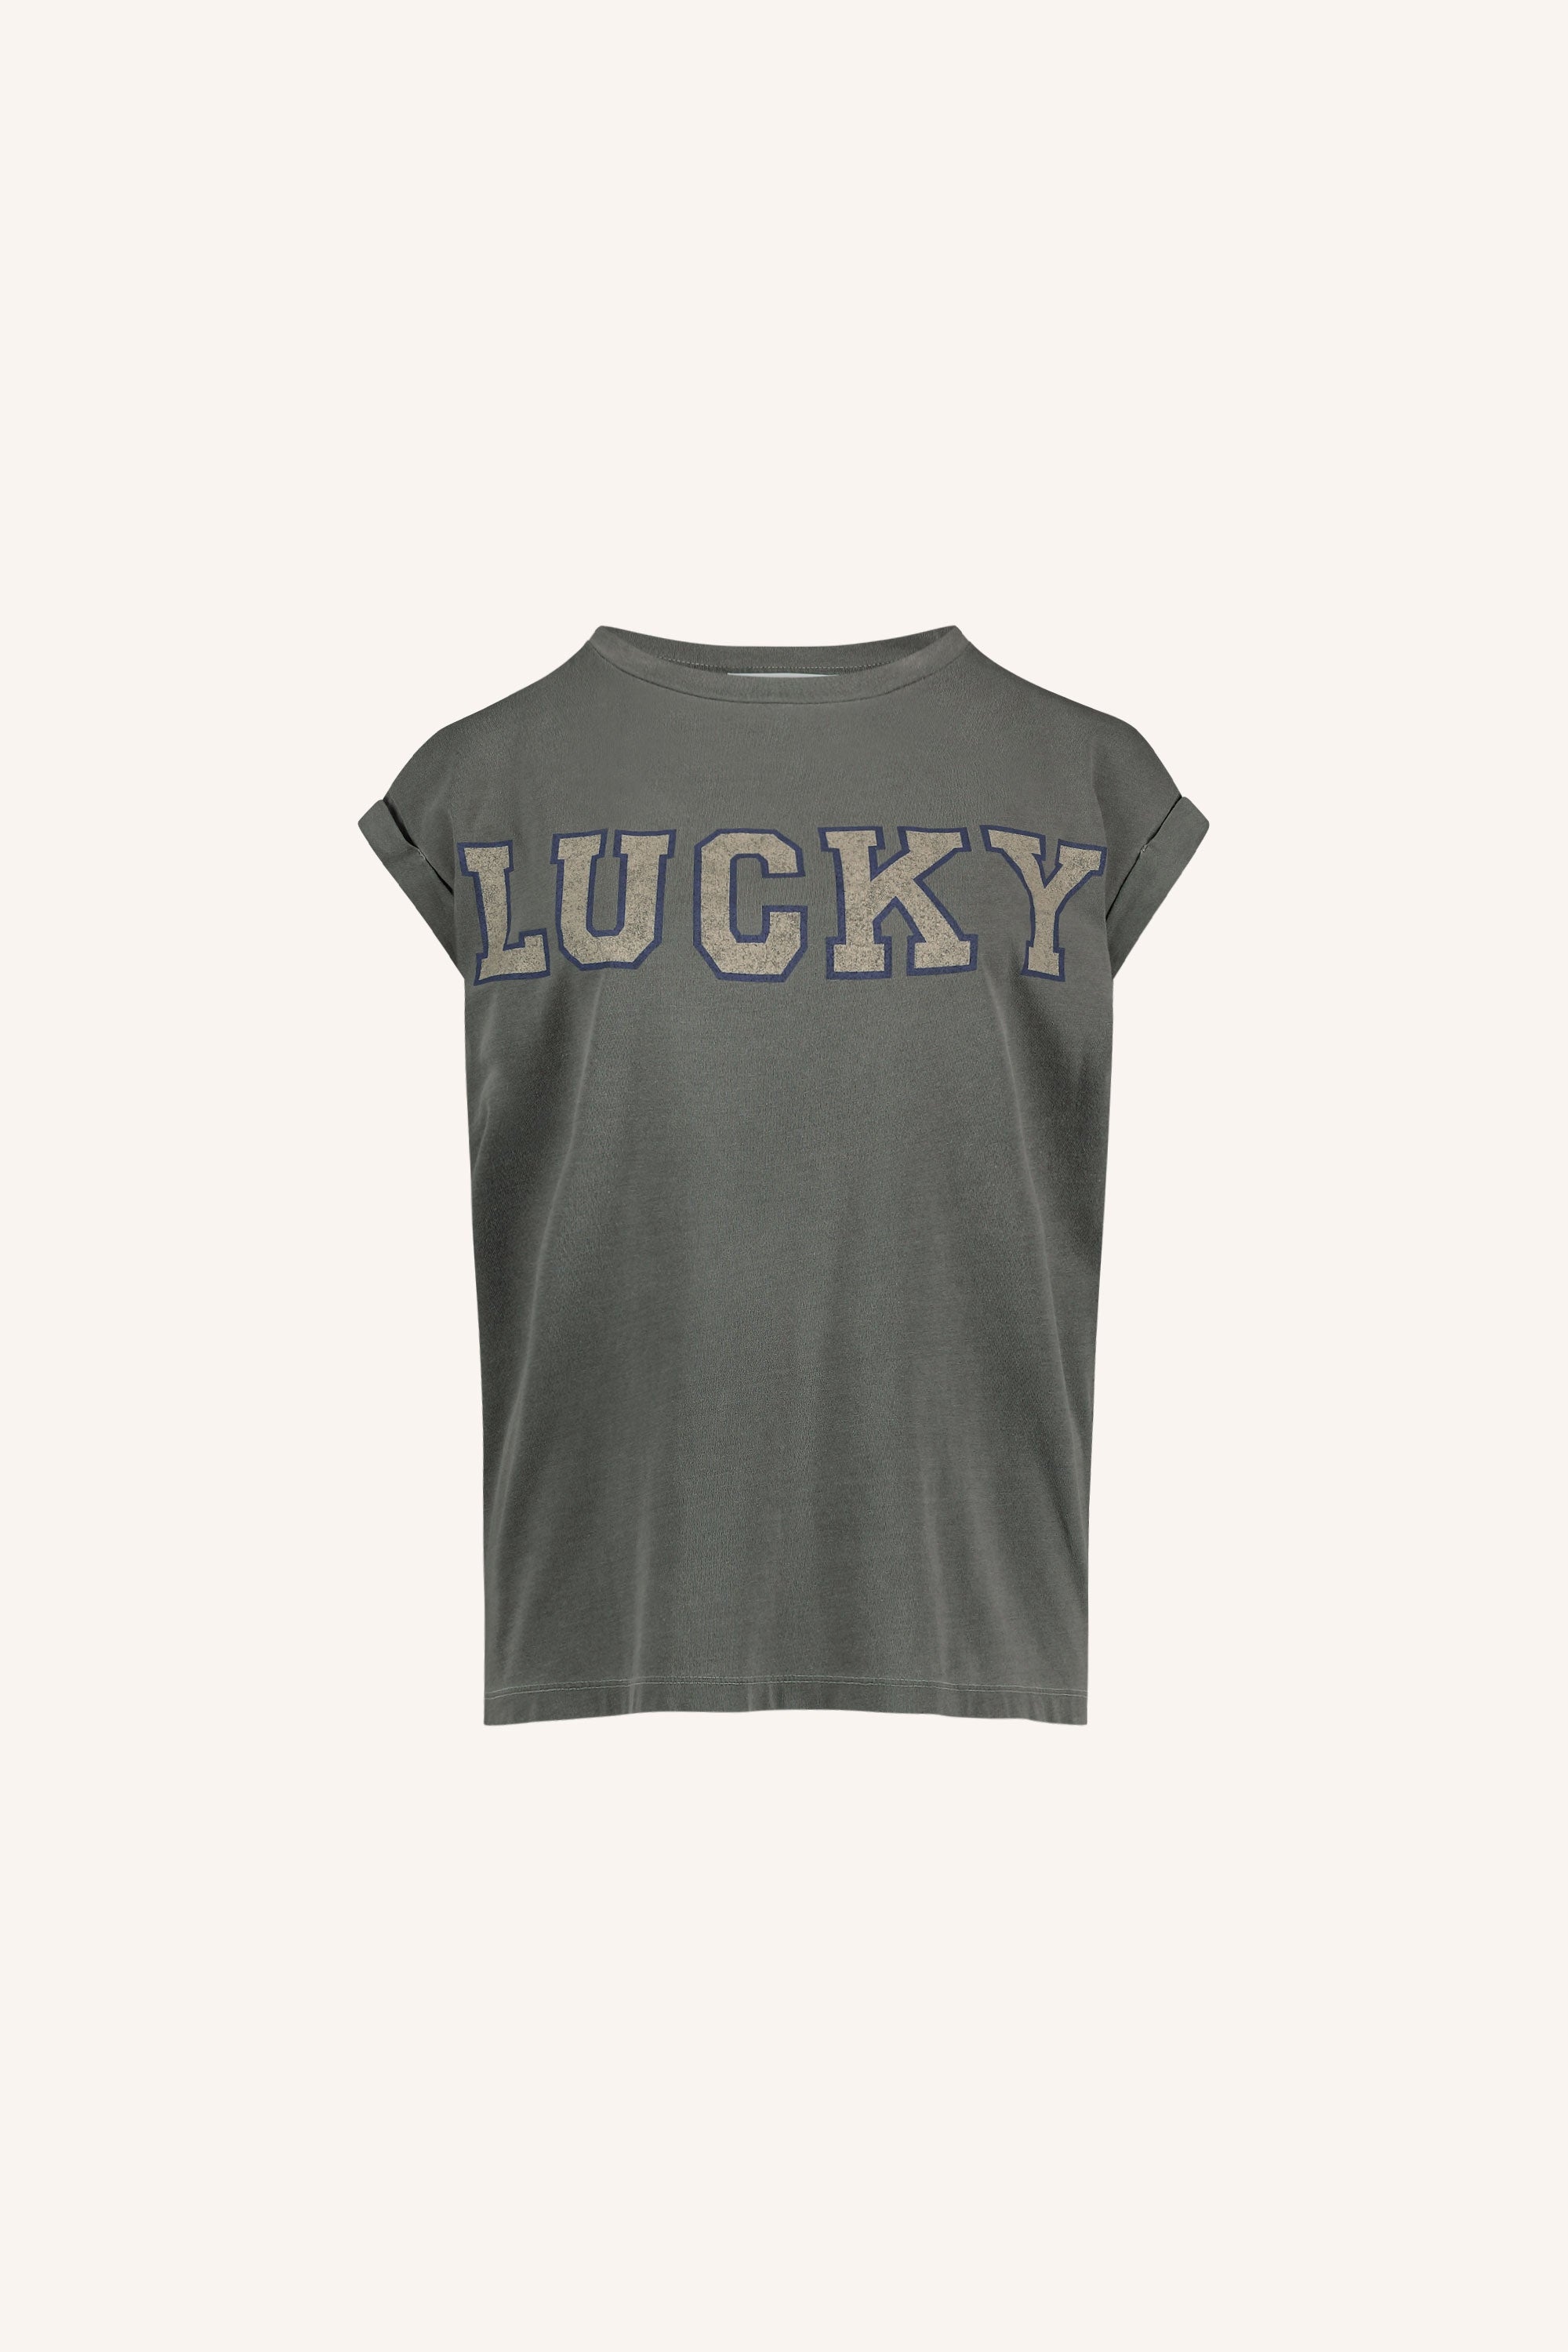 thelma lucky vintage top | charcoal